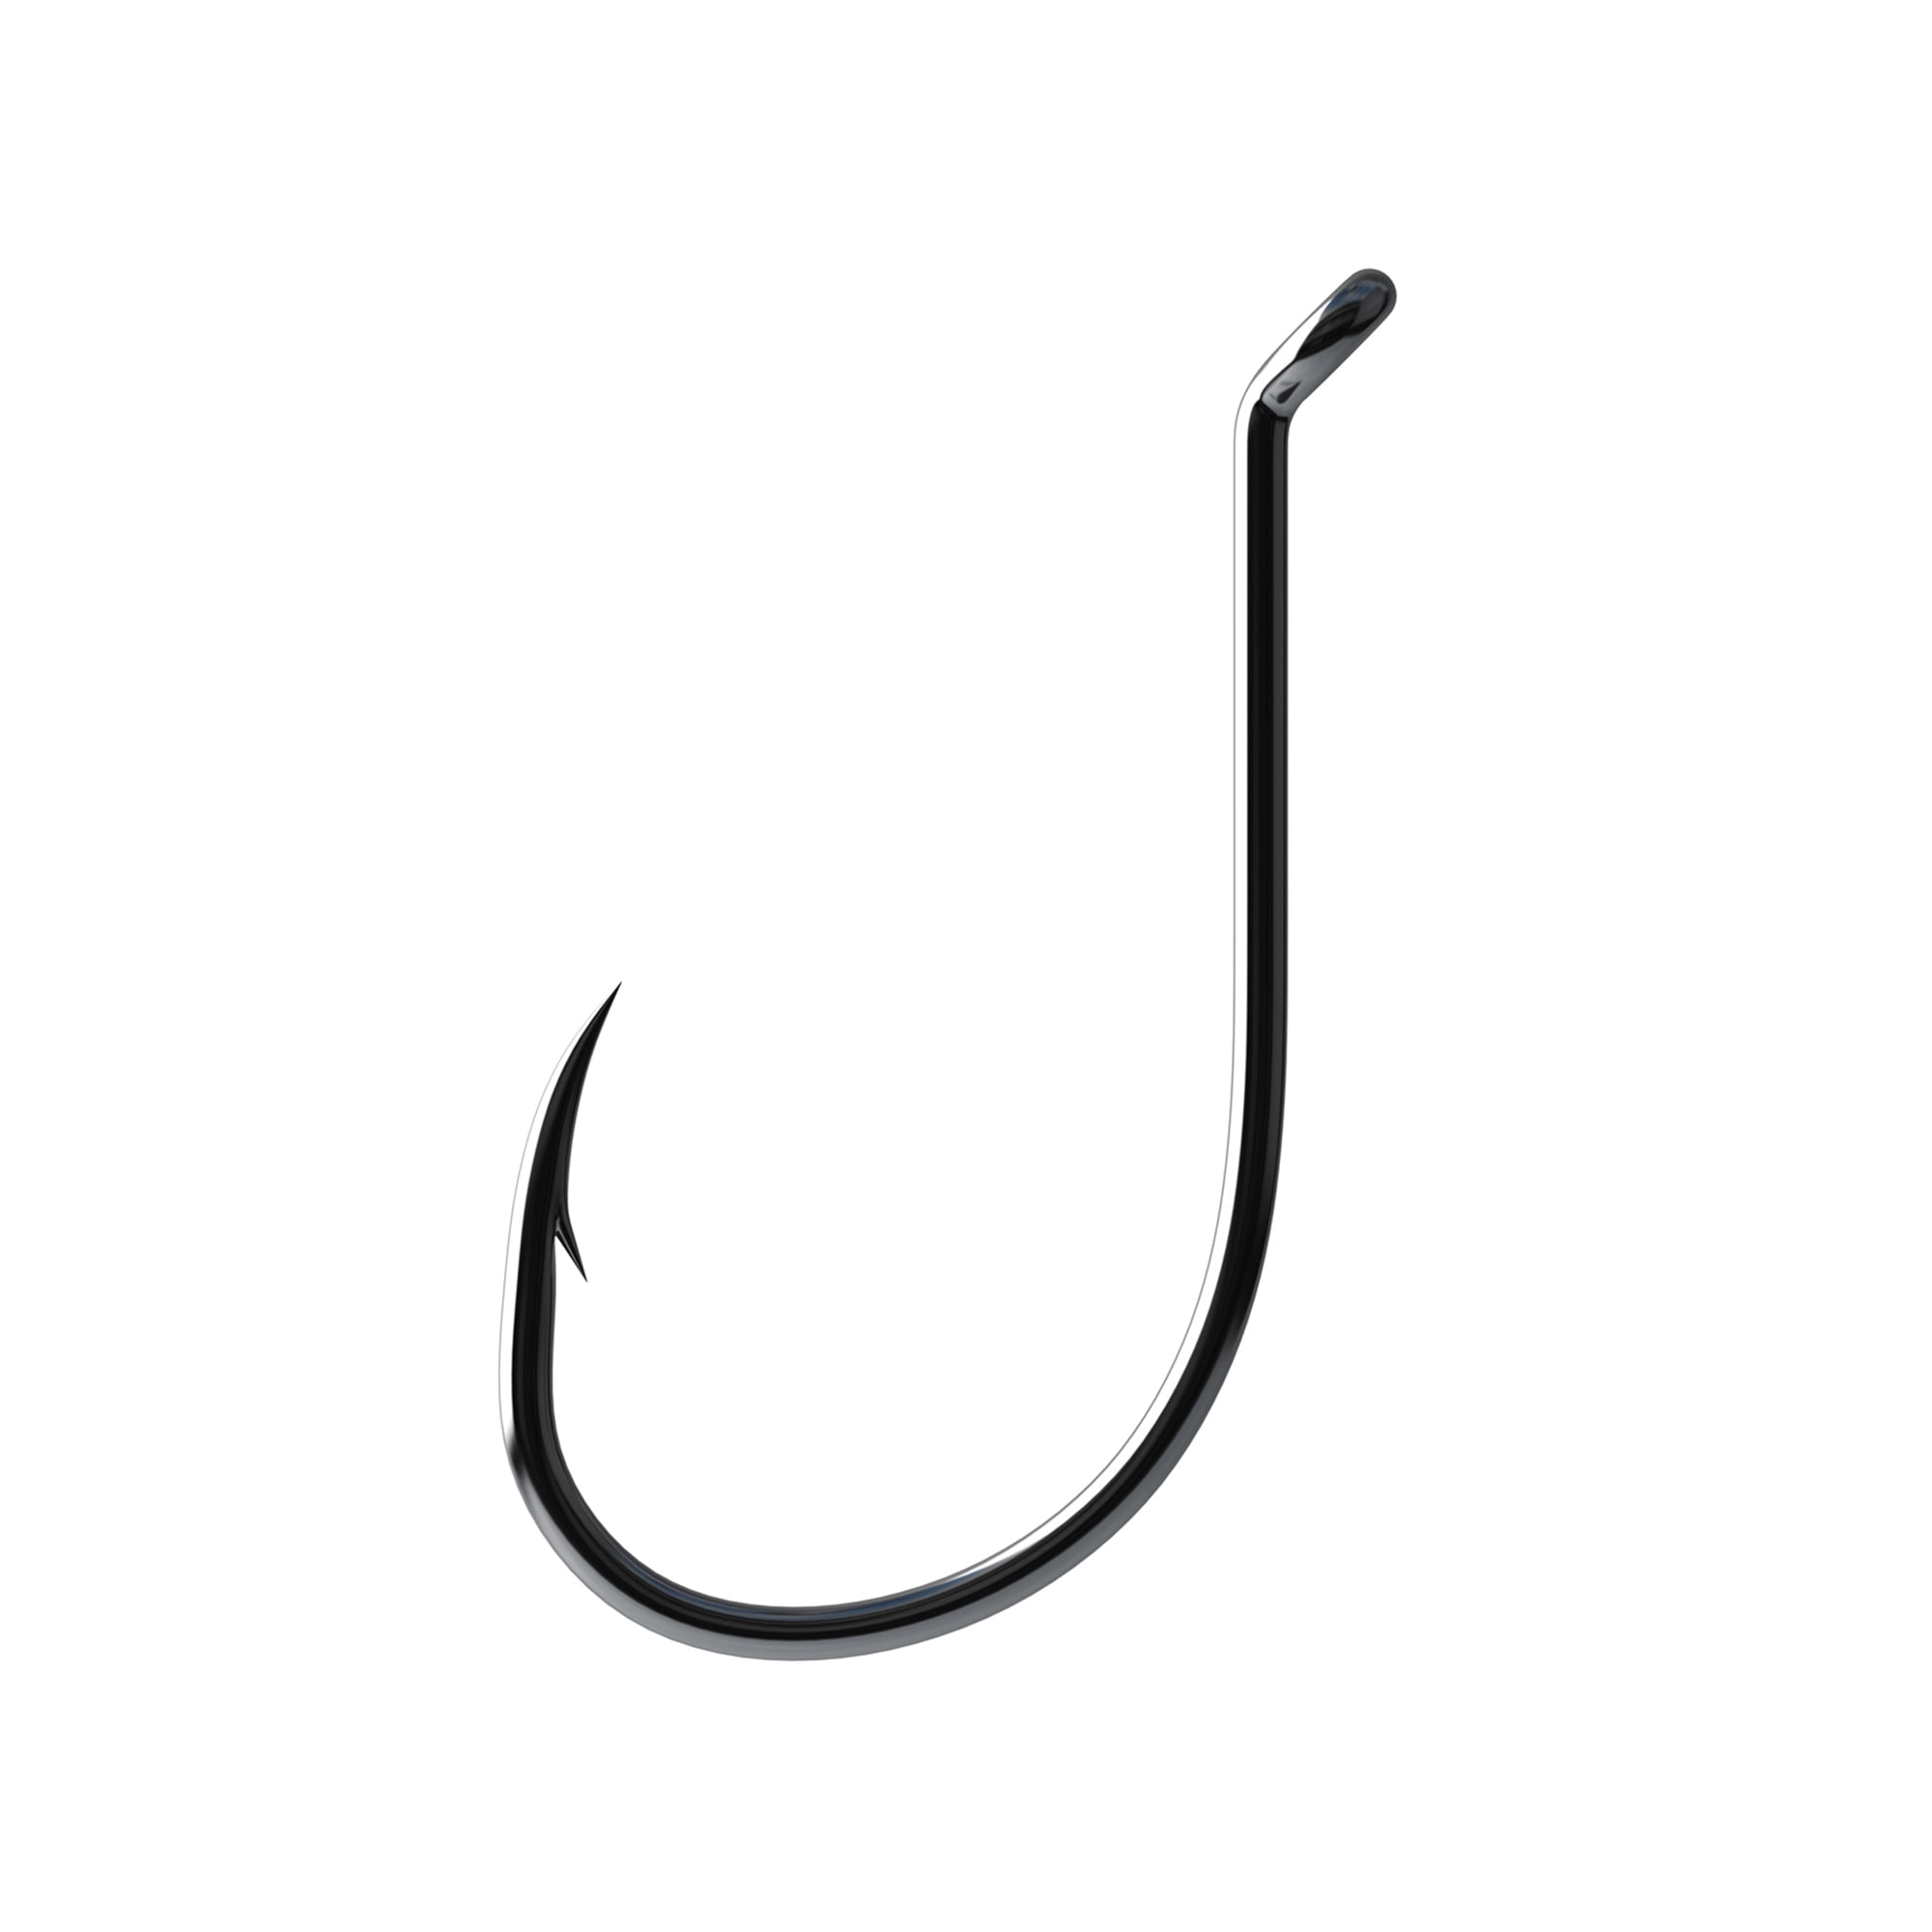 Details about   Eagle Claw 3 3 Pks 155RWBA Hat Hooks Tie Clasp Fishing Hook Red,White,Blue “Save 